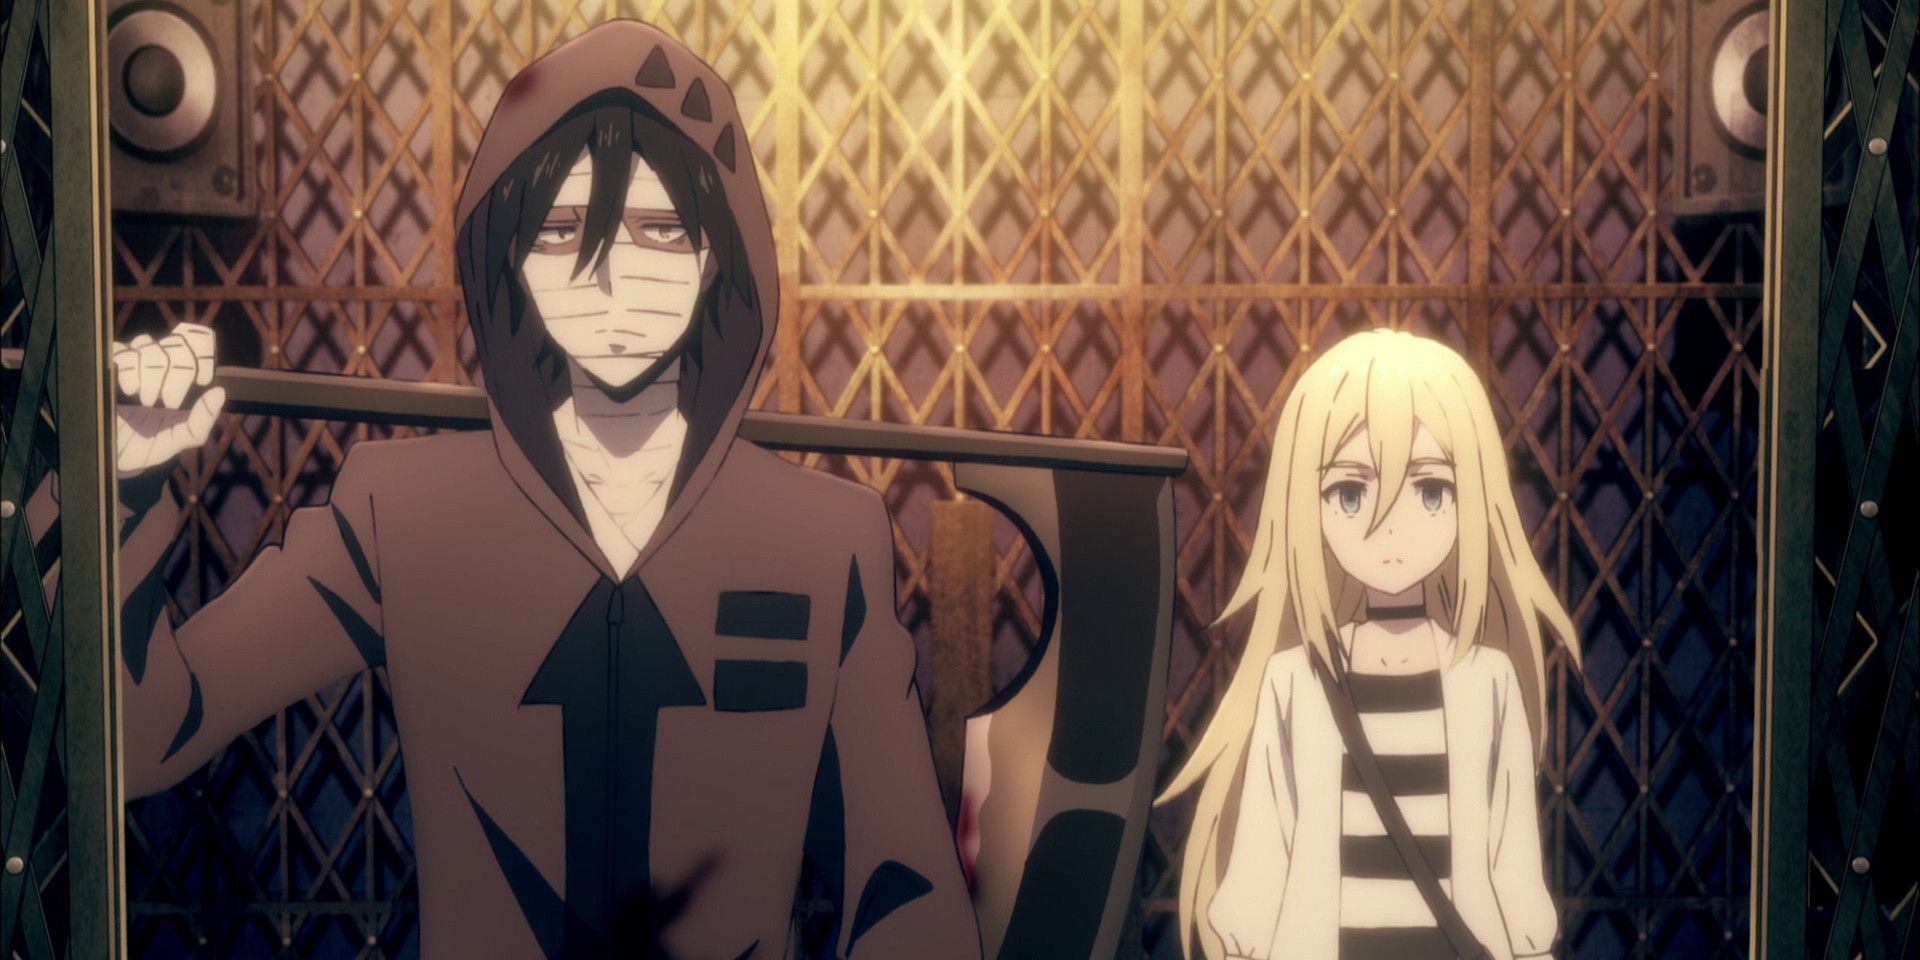 Isaac "Zack" Foster with a scythe over his shoulder and riding an elevator with Rachel Gardener in Angels of Death